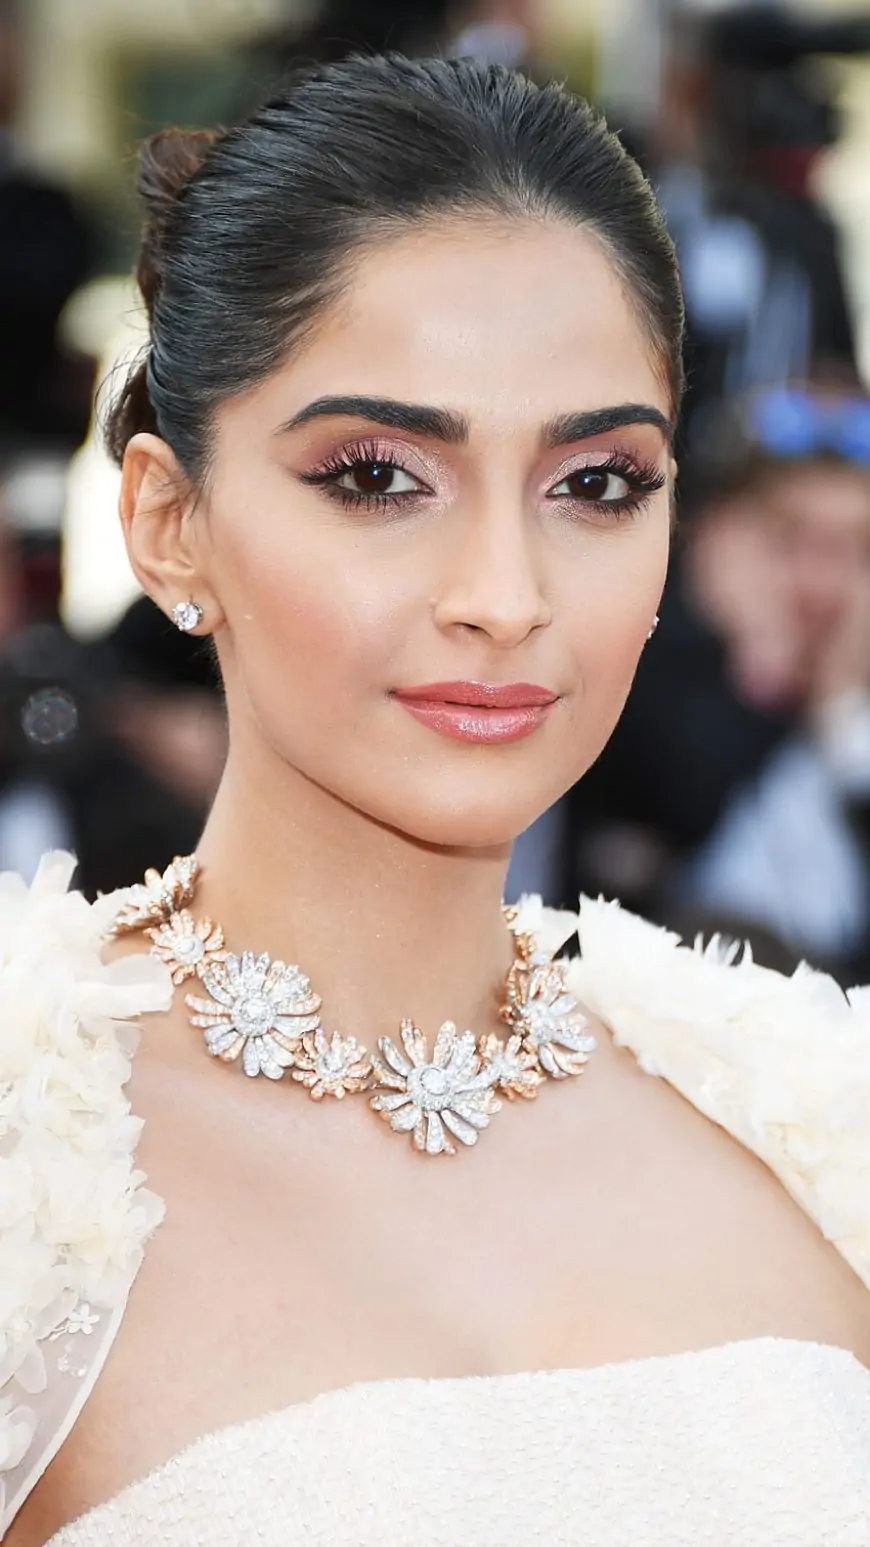 Sonam Kapoor Biography: Age, Husband, Family, Net Worth and More